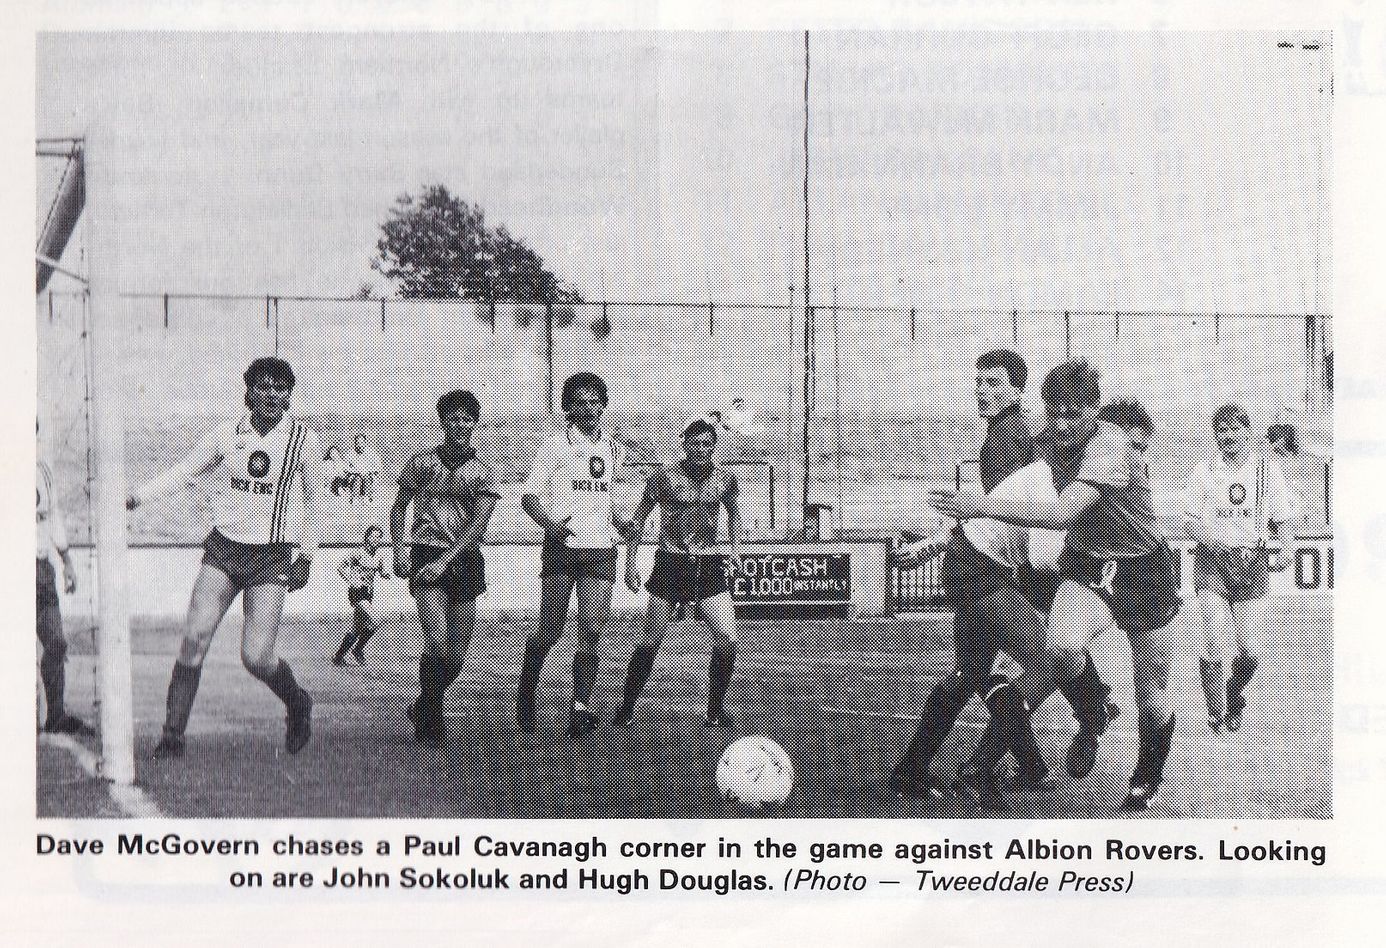 AlbionRovers100885a